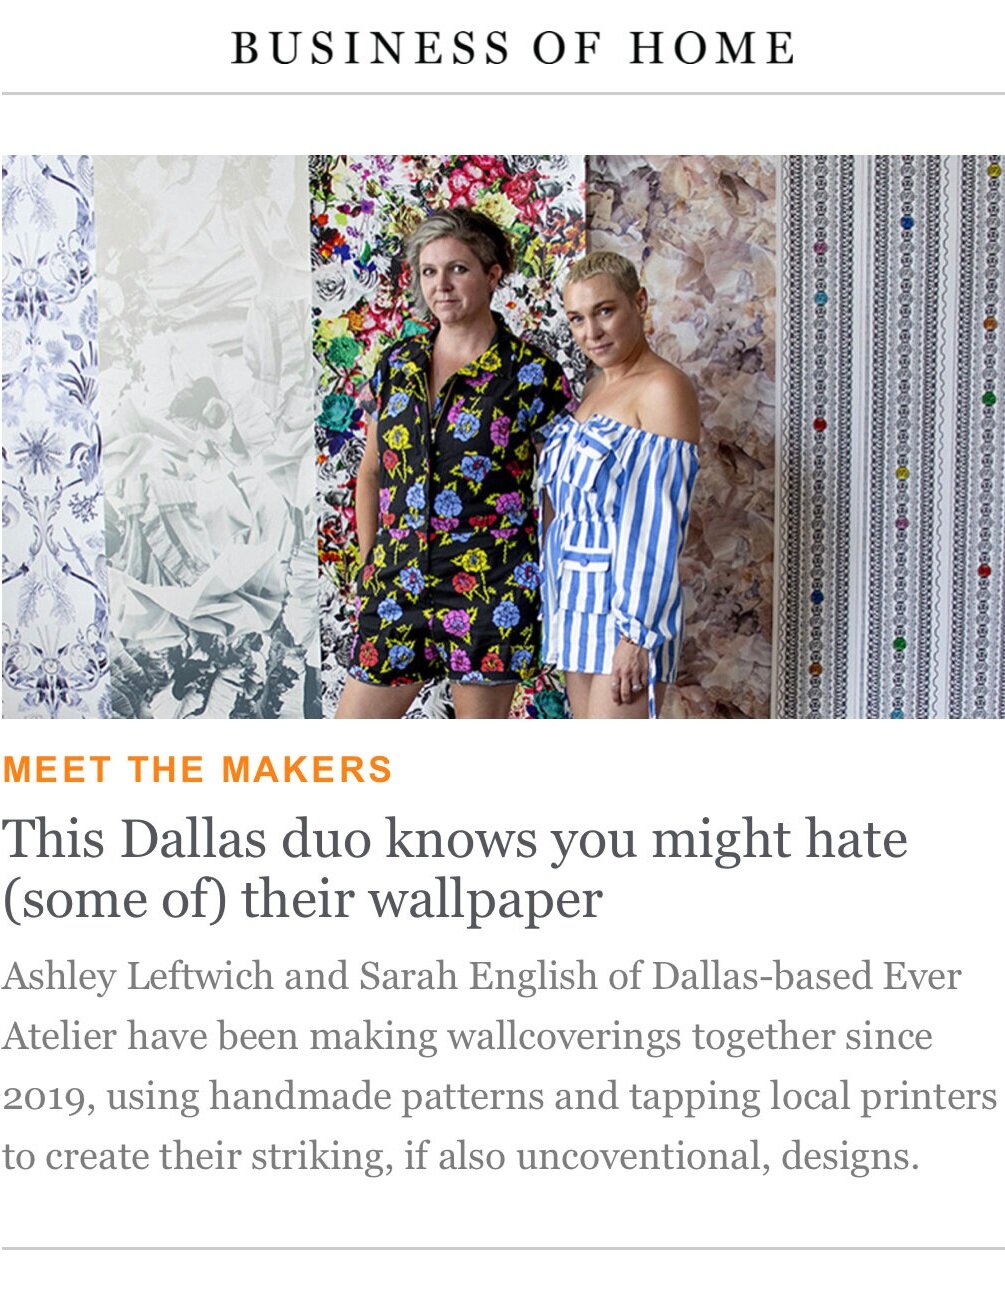  This Dallas duo knows you may hate some of their wallpapers. Modern and Luxury art wallpaper 